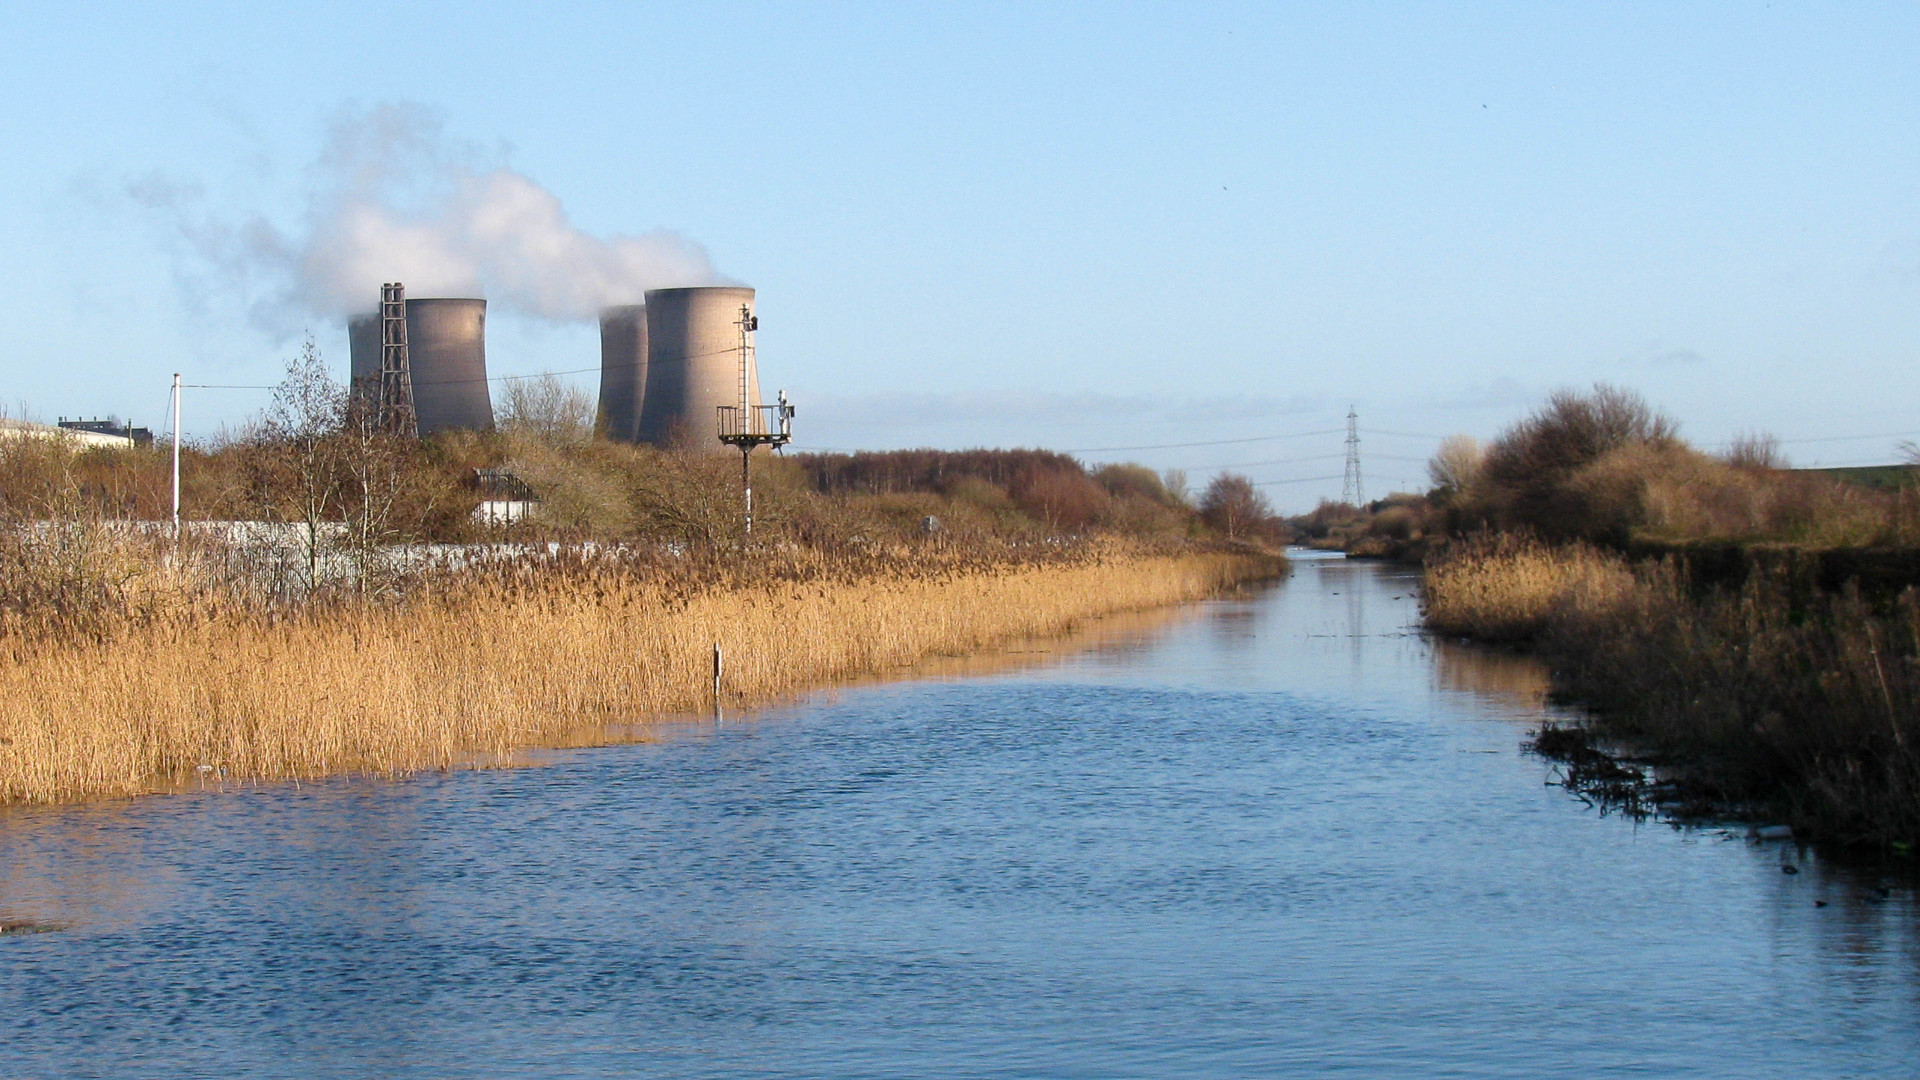 Fiddler's Ferry Power Station sits next to the canal